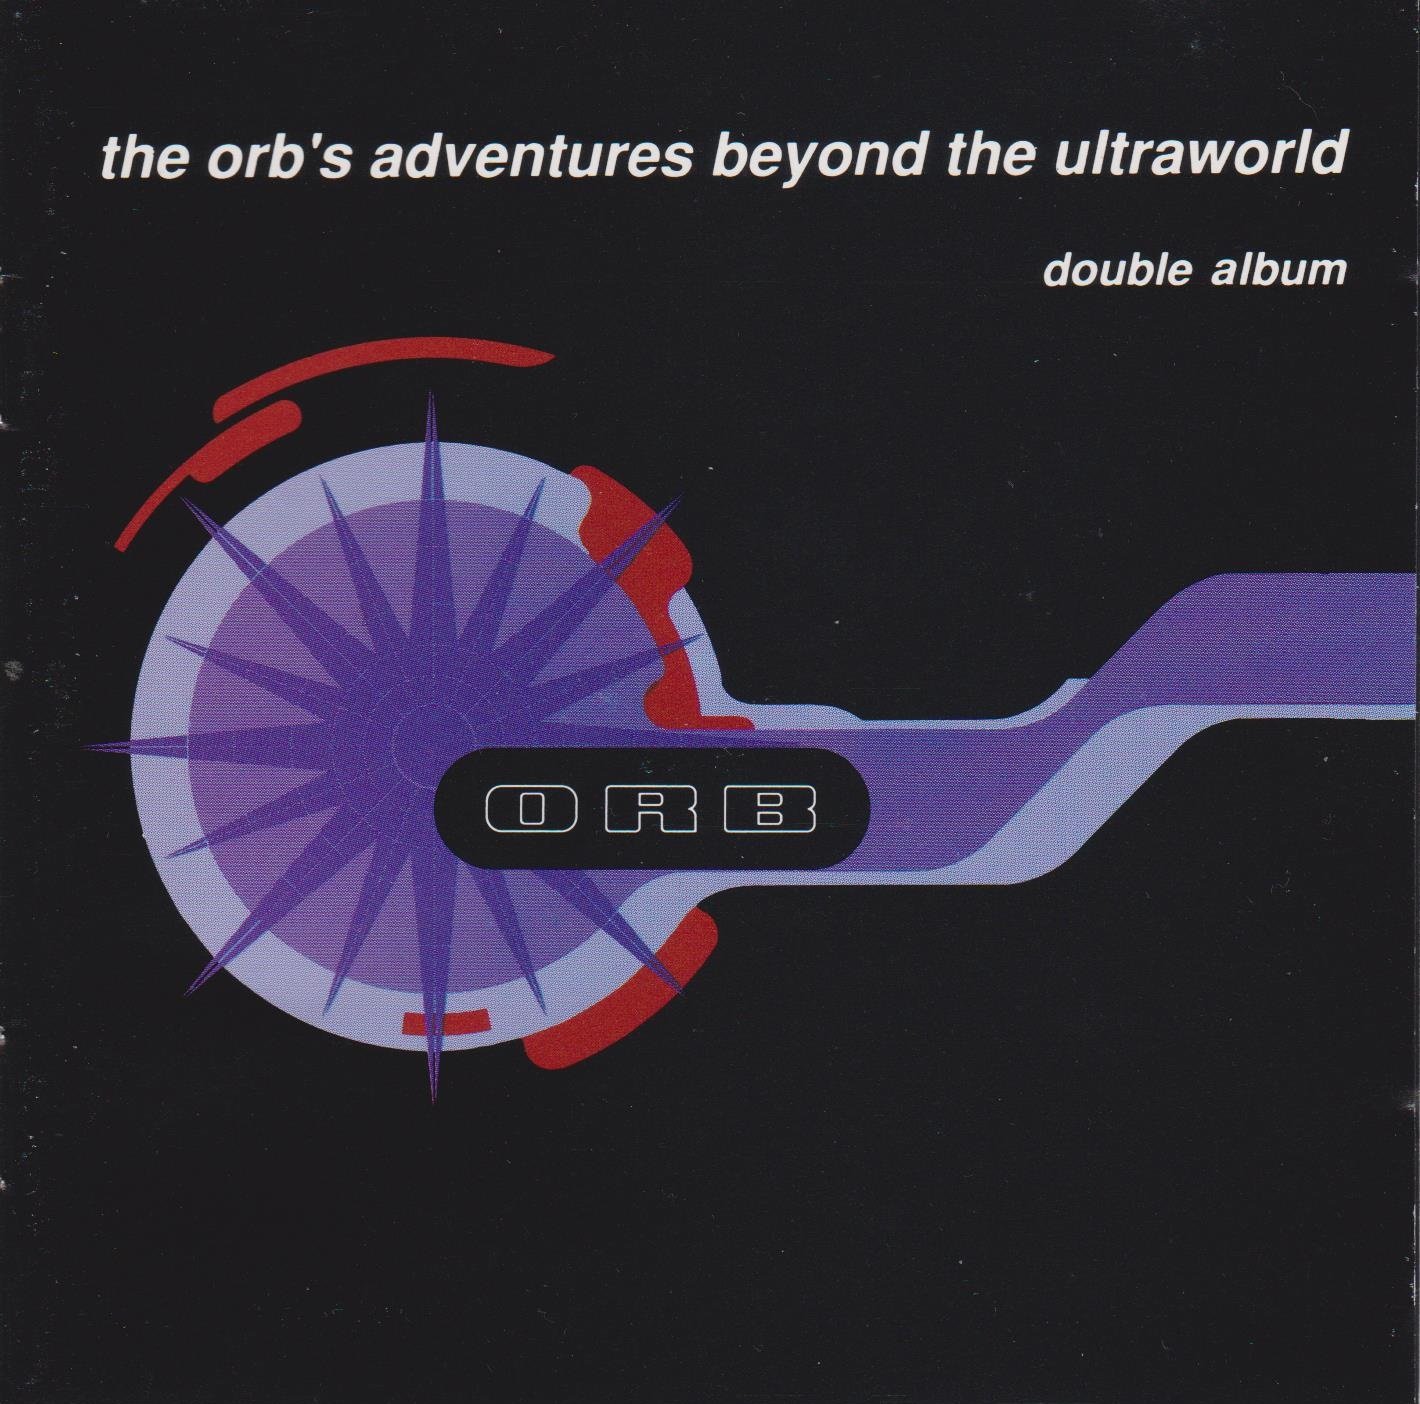 The Orb's Adventures Beyond the Ultraworld, The Orb